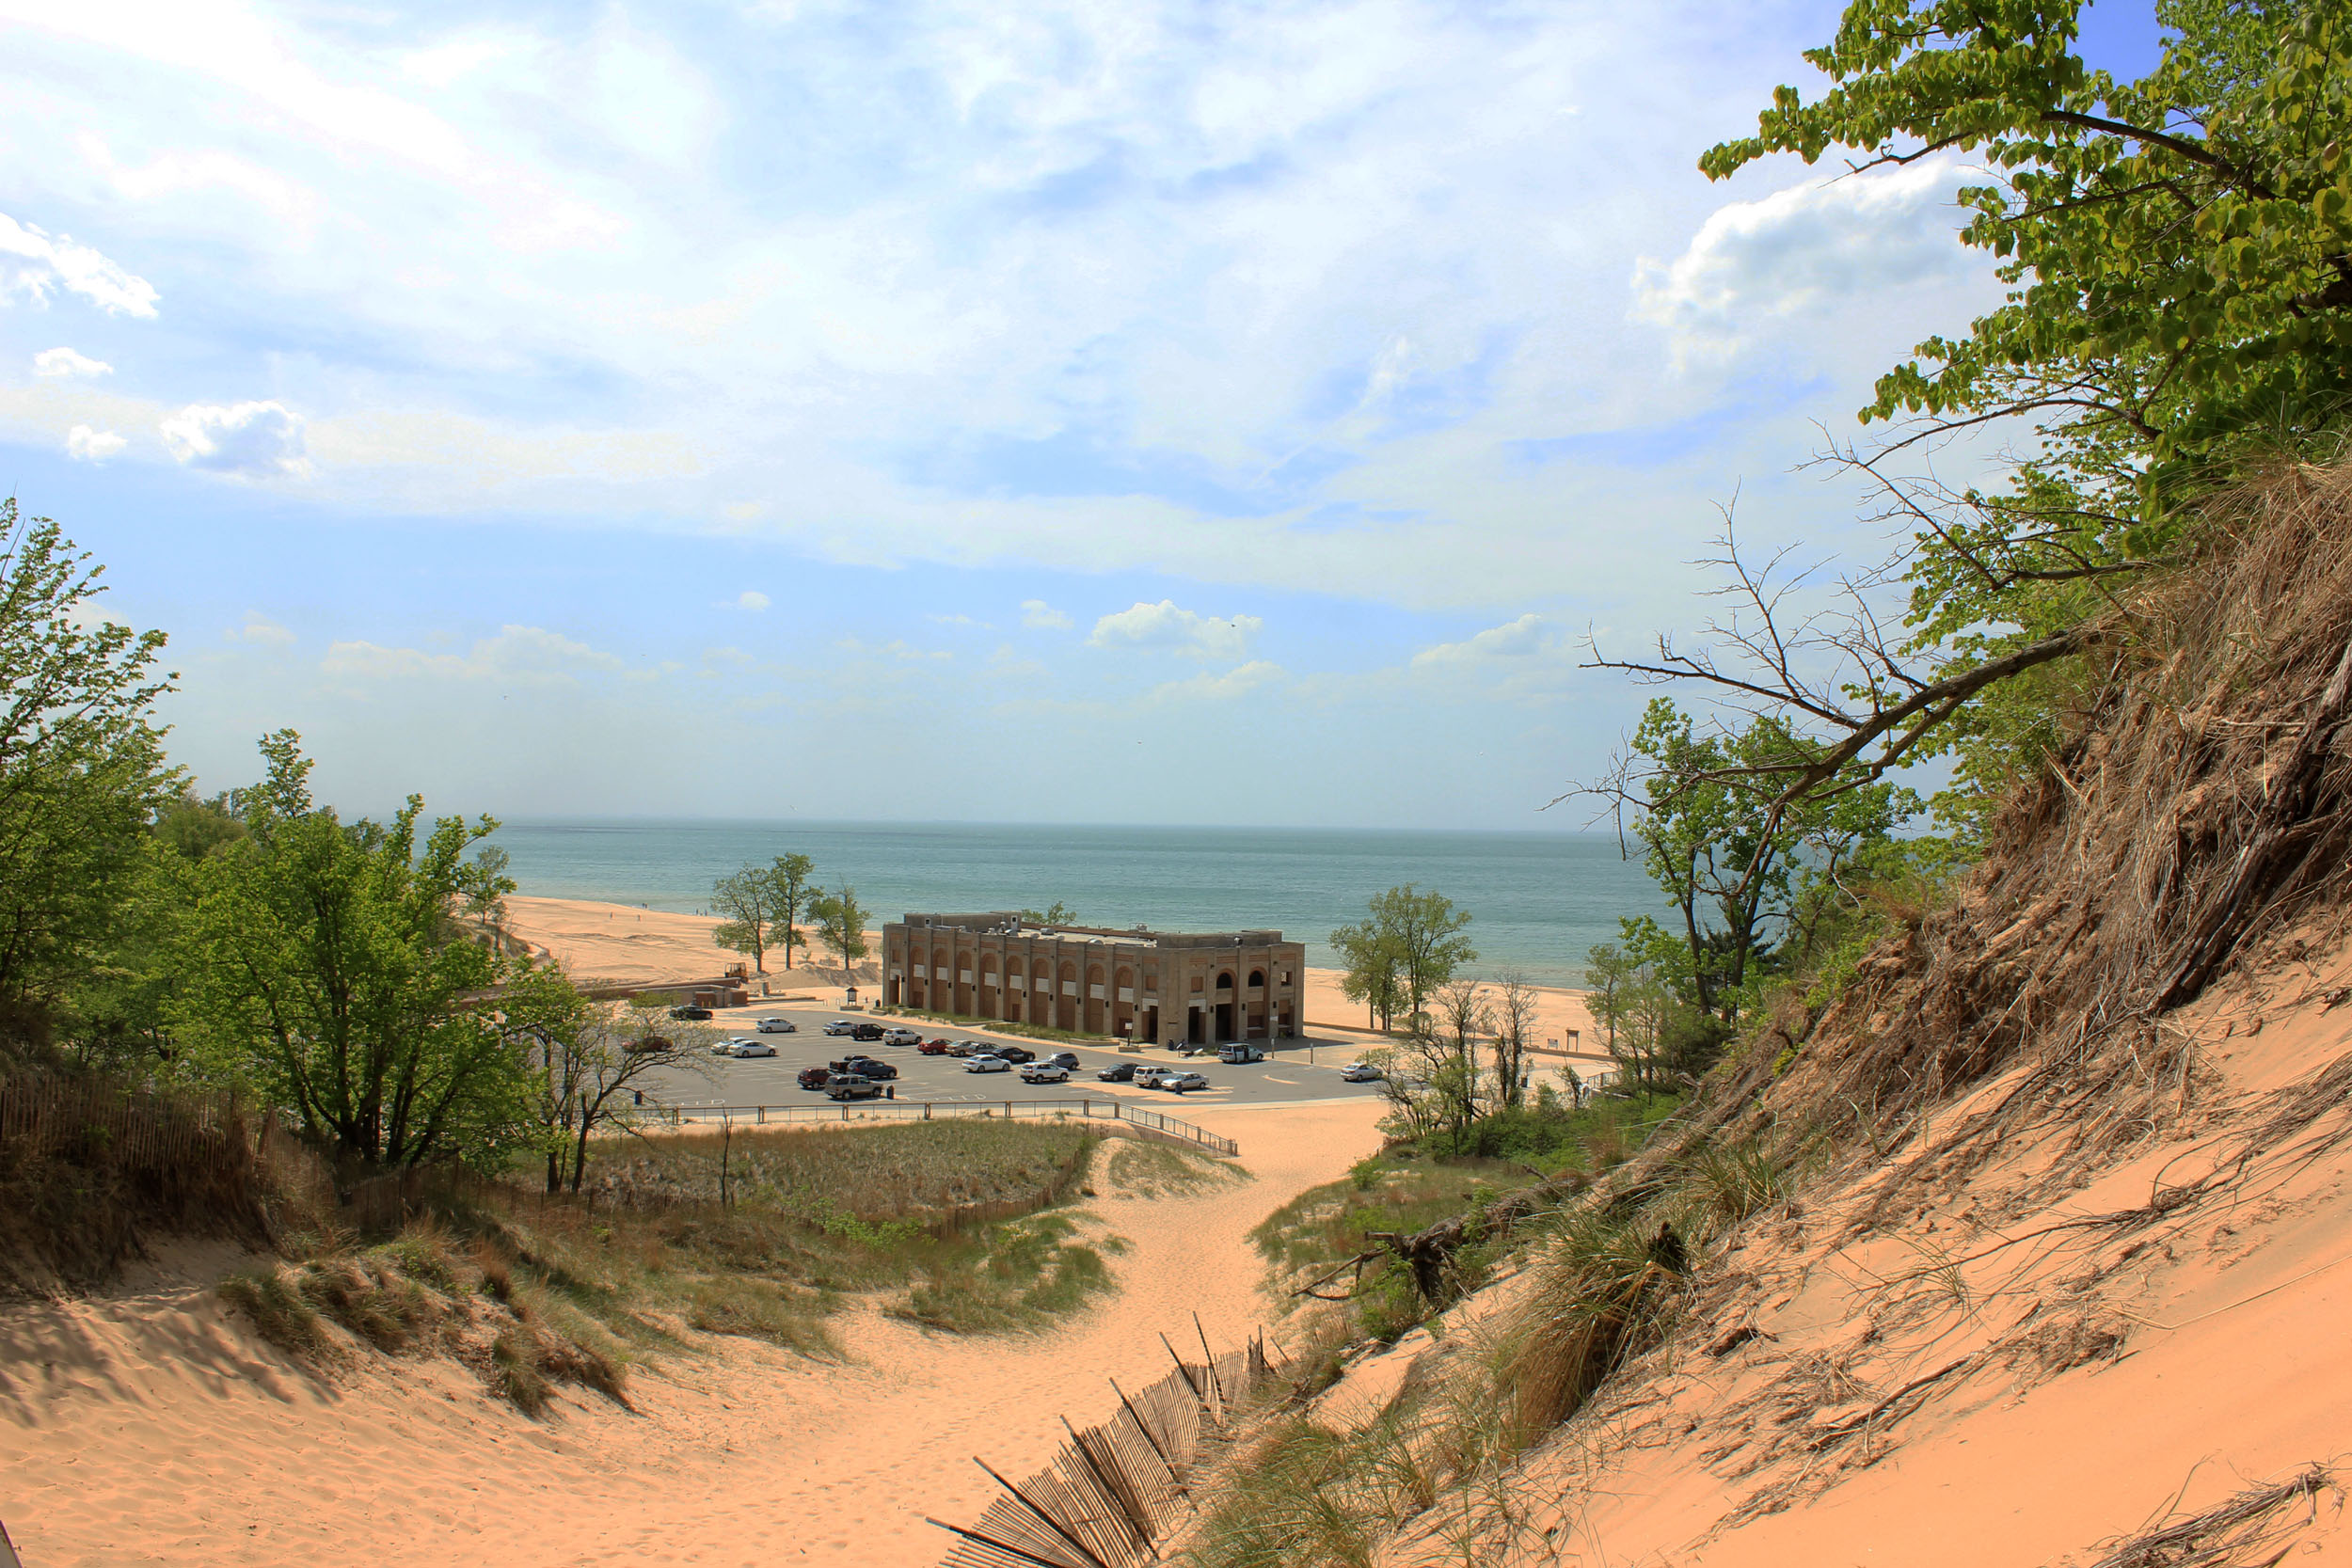 View from the Dune